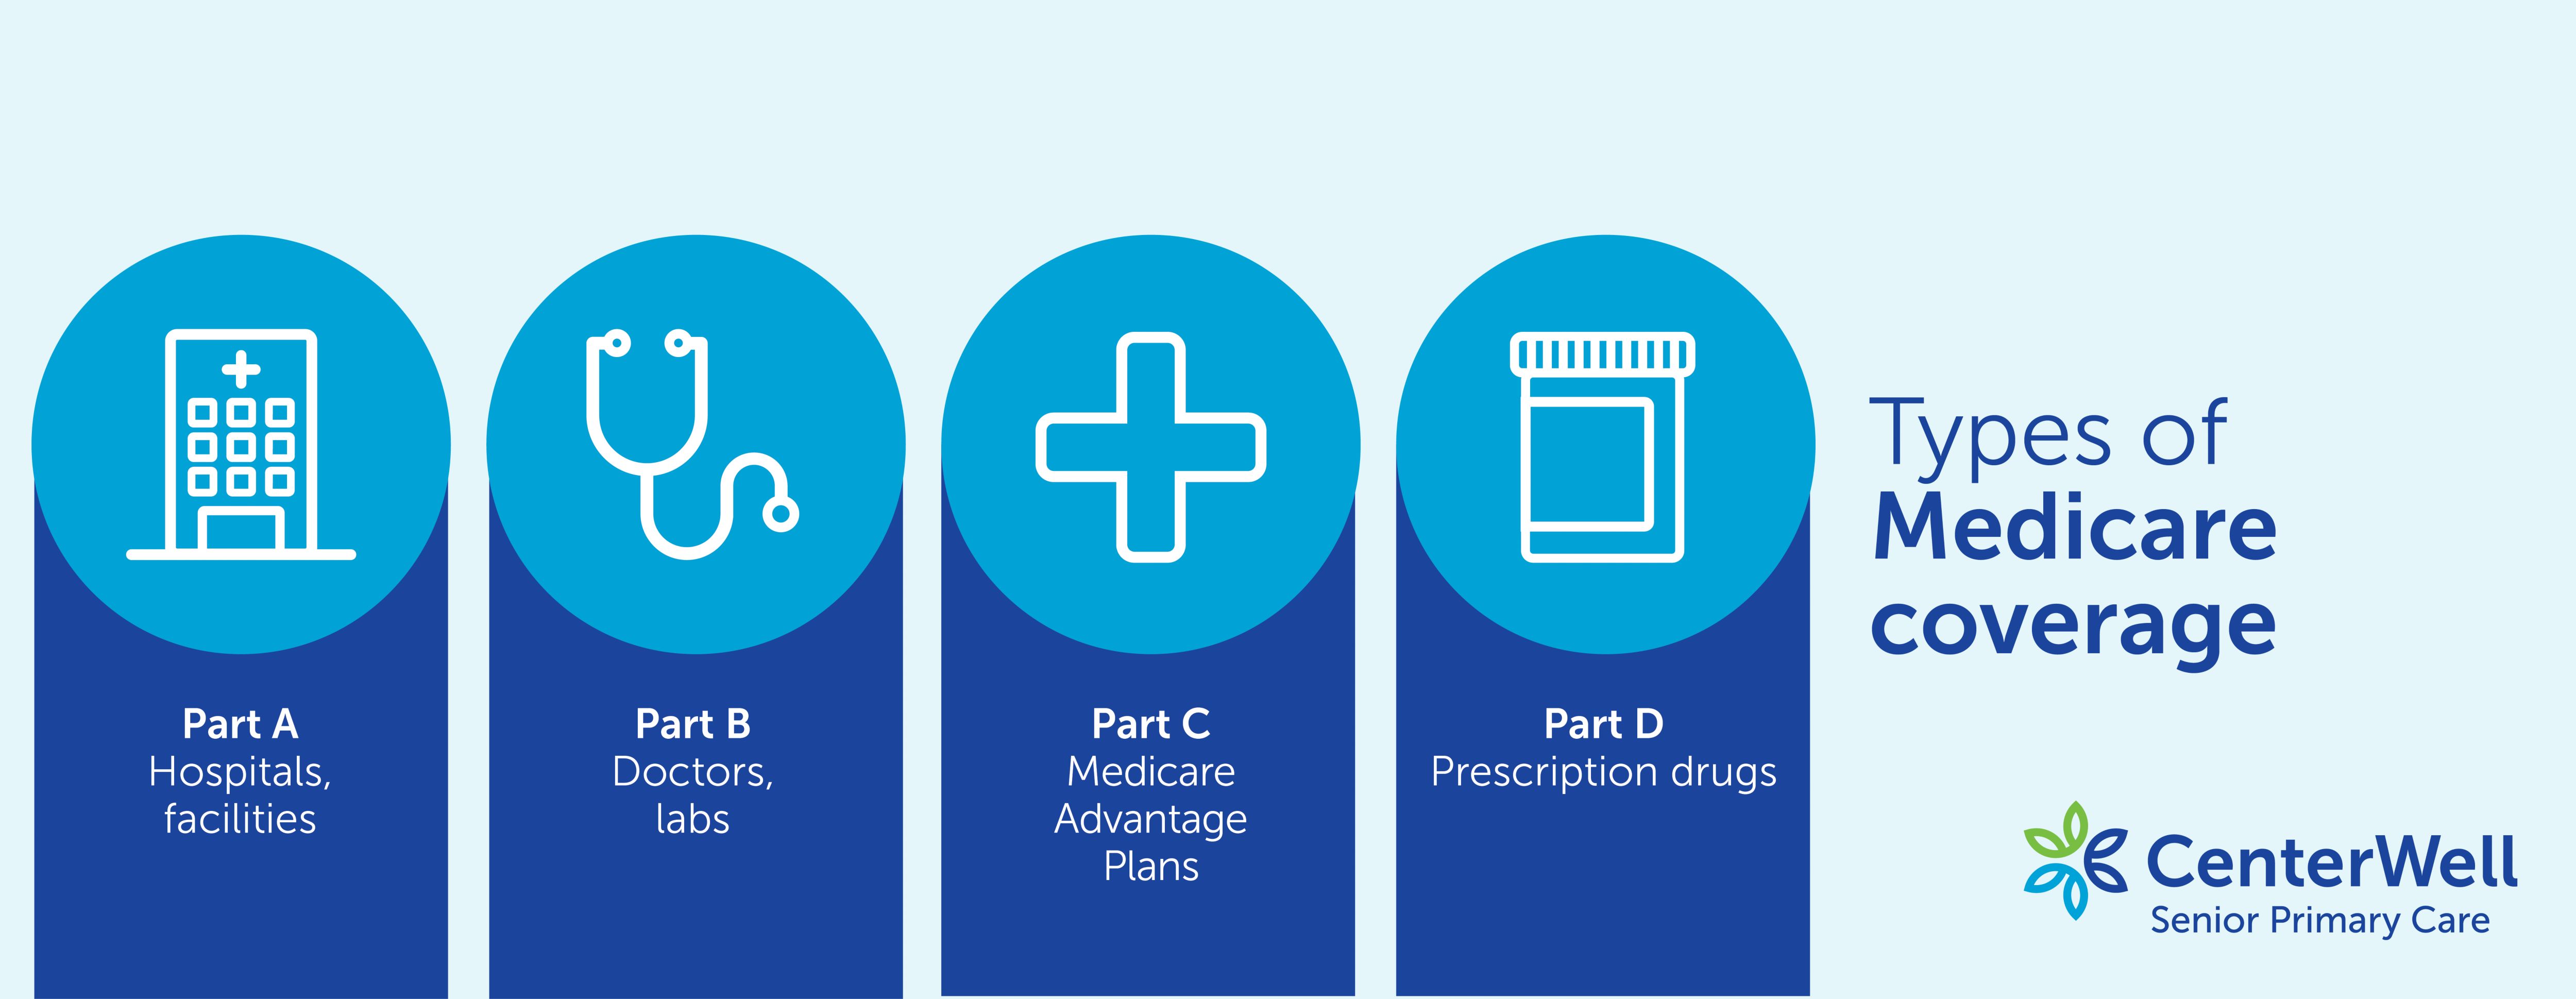 Types of Medicare coverage